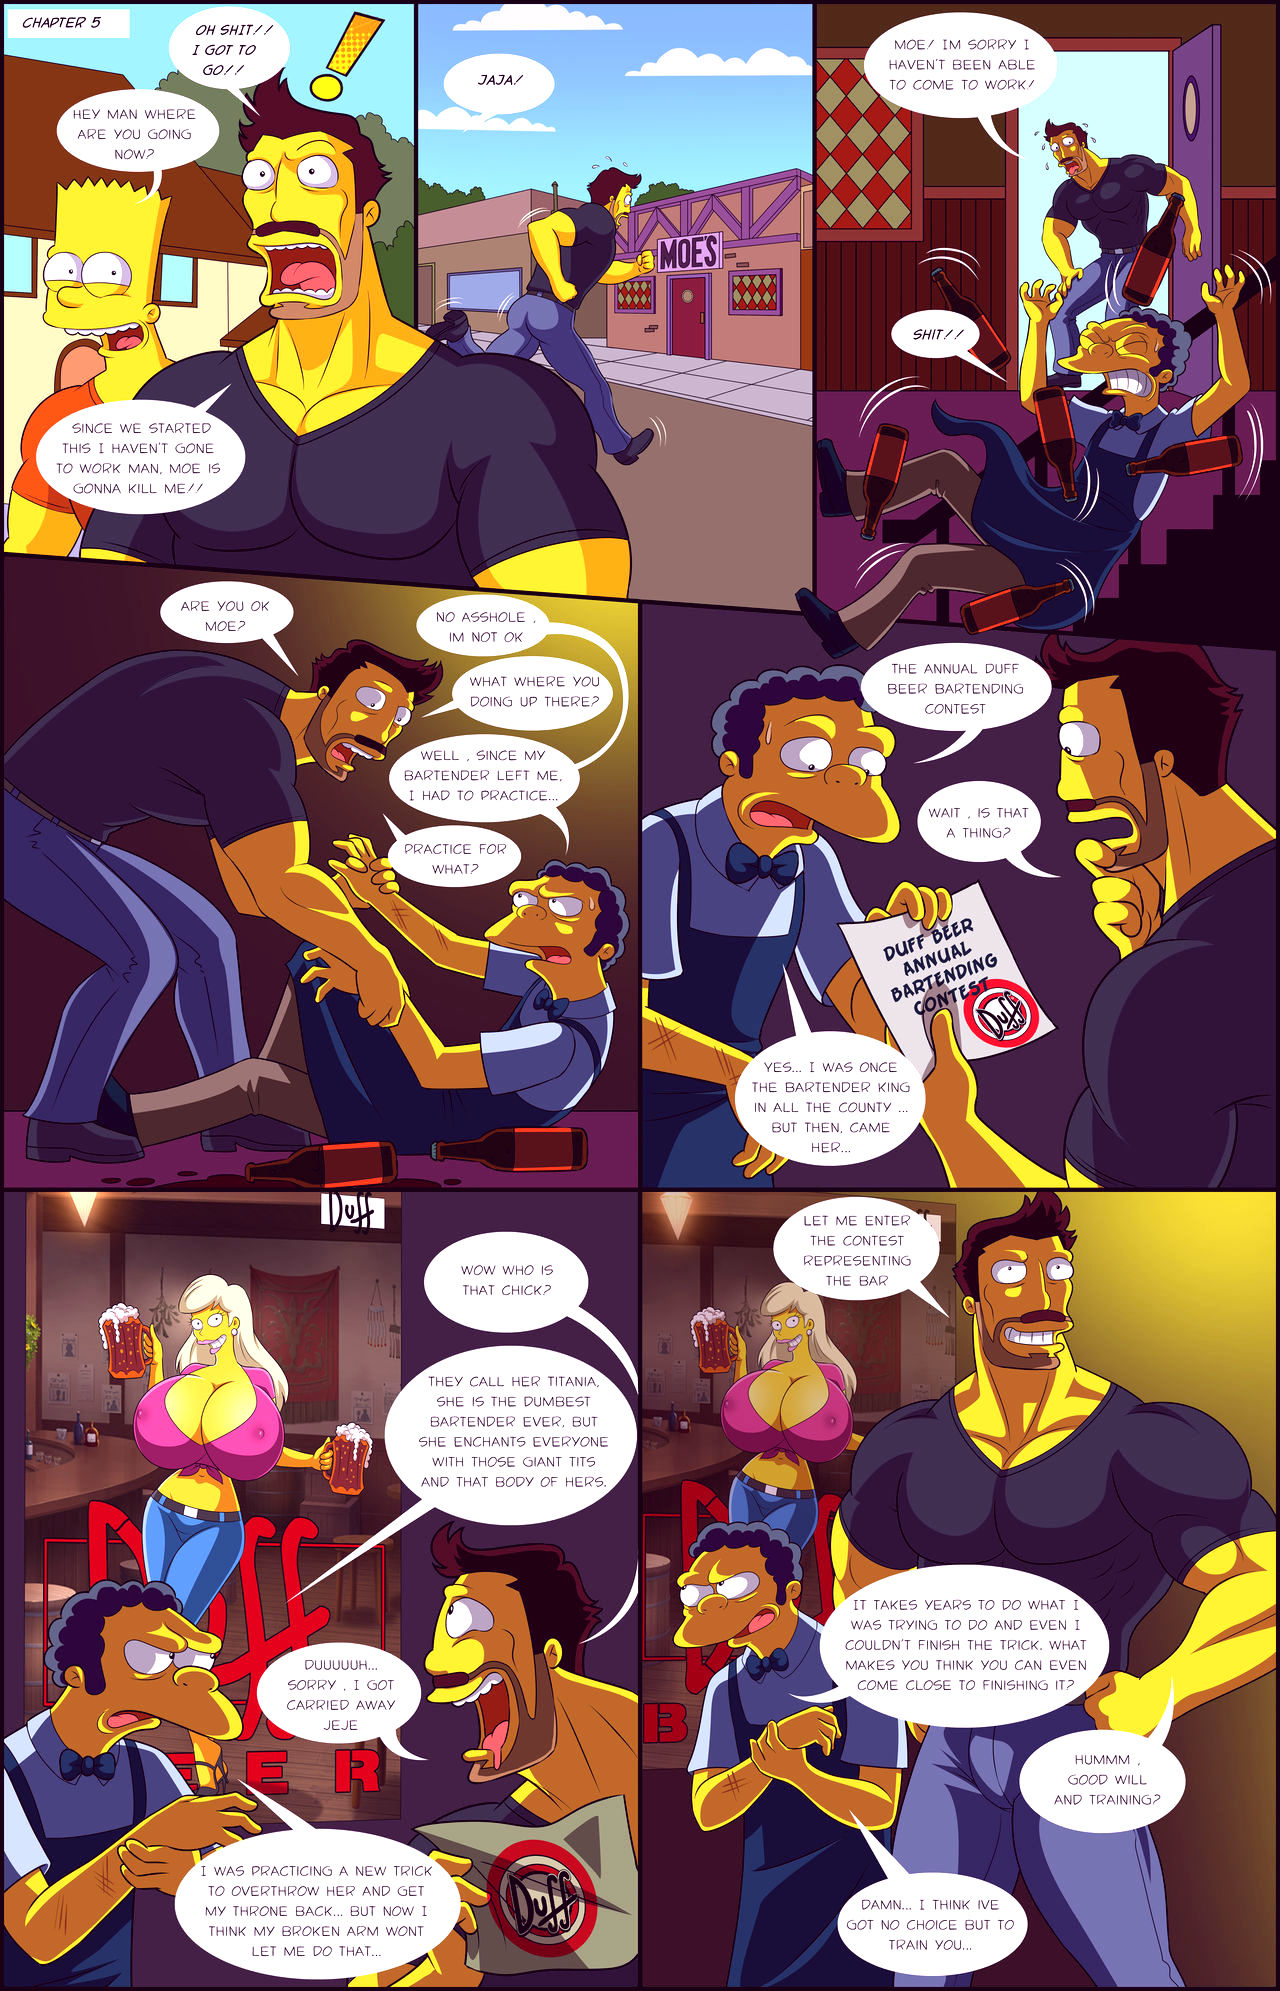 Darrens adventure or welcome to springfield porn comic picture 22